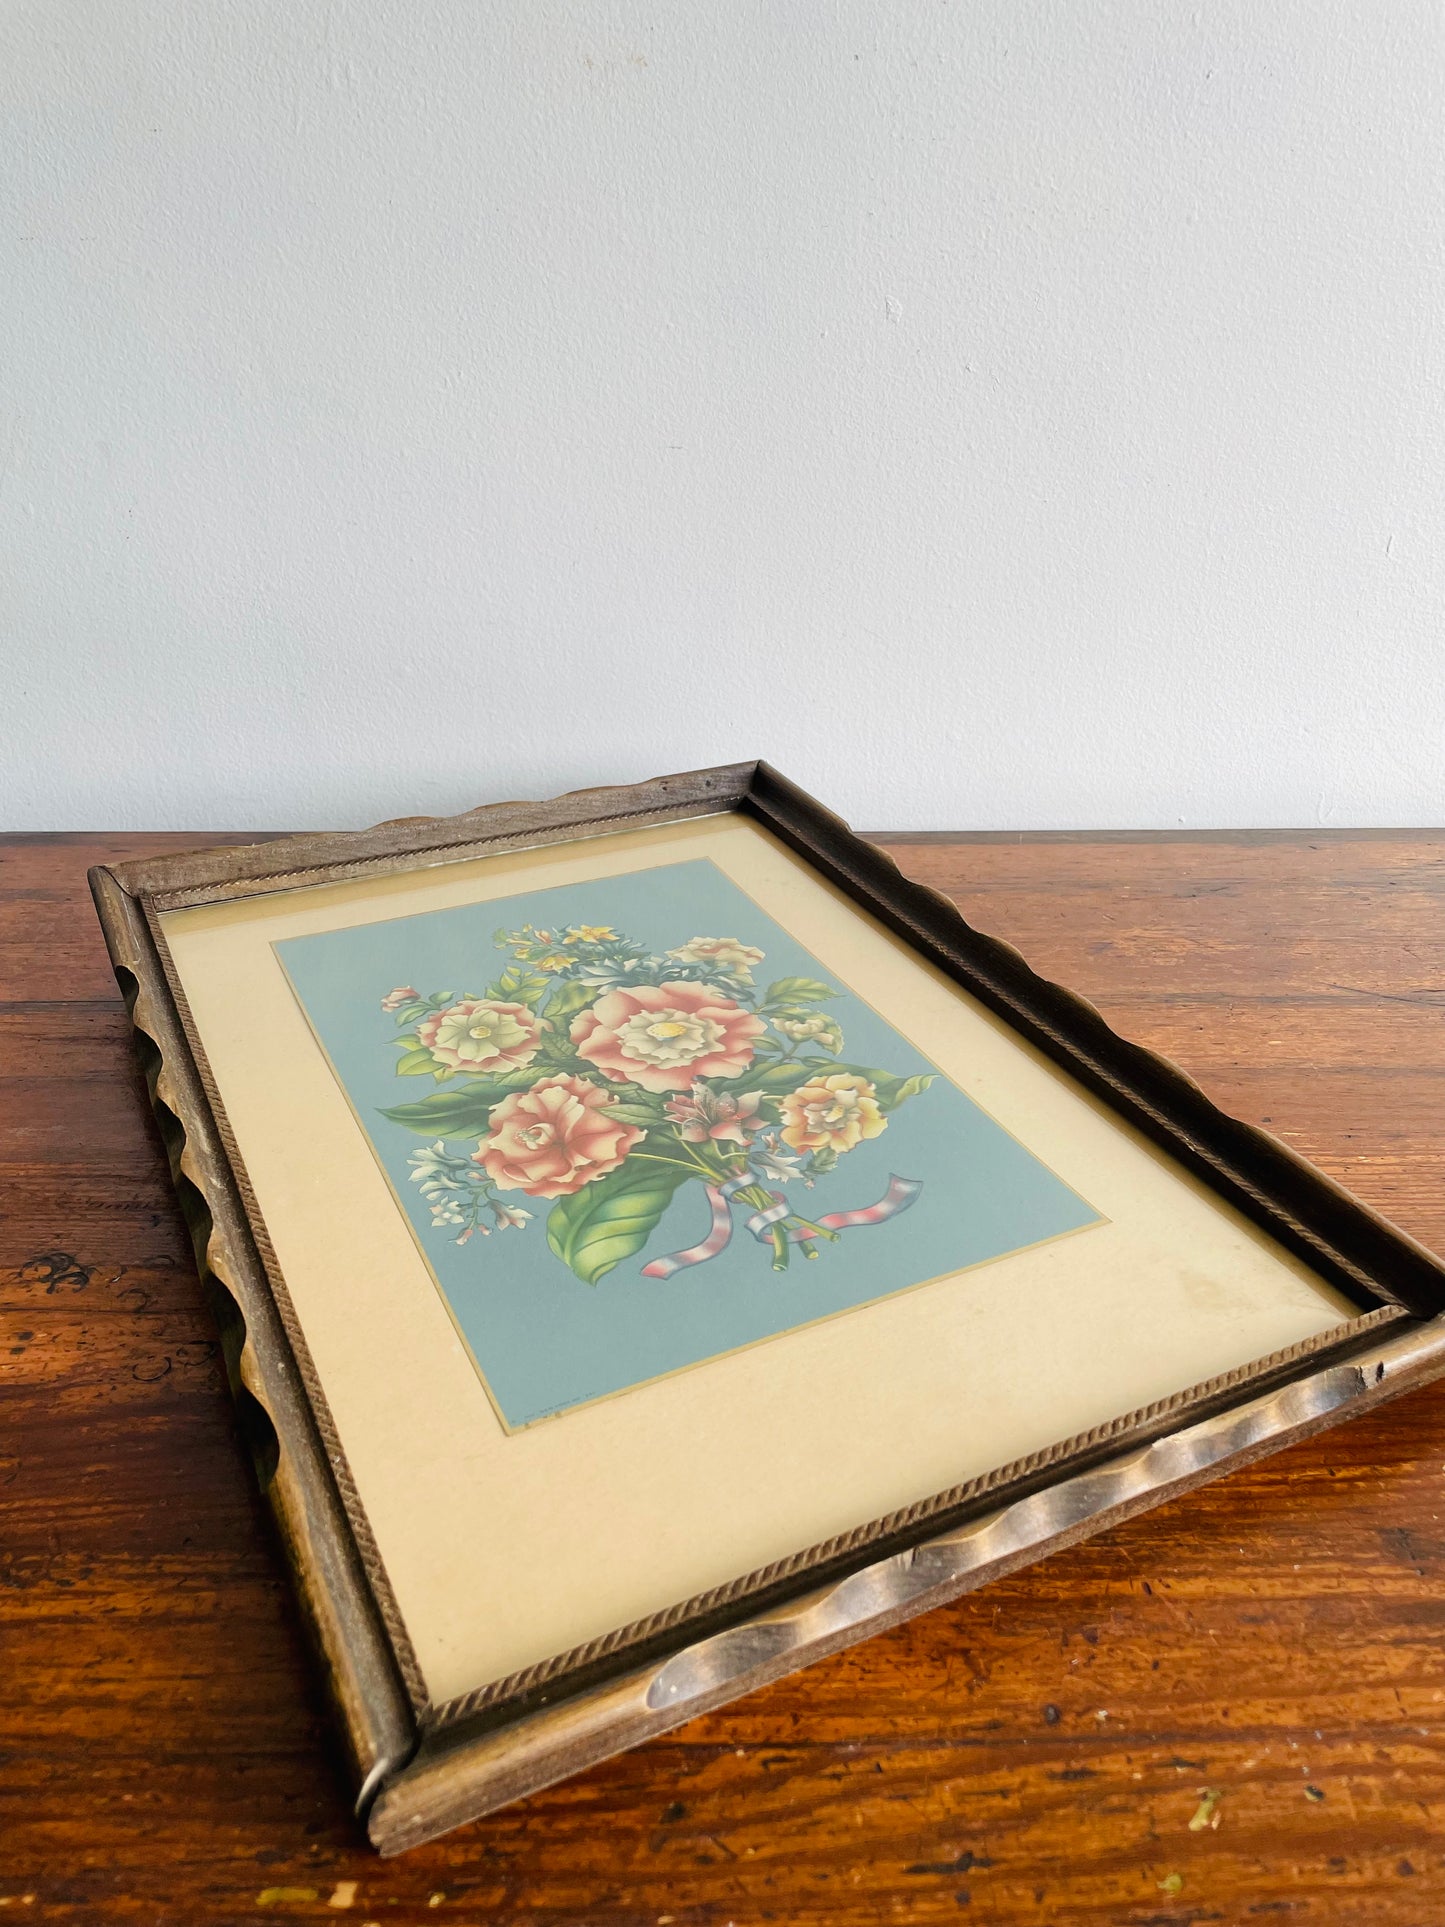 Framed Lithograph Print Picture of Flowers in Scalloped Wood Frame - New York No. 297